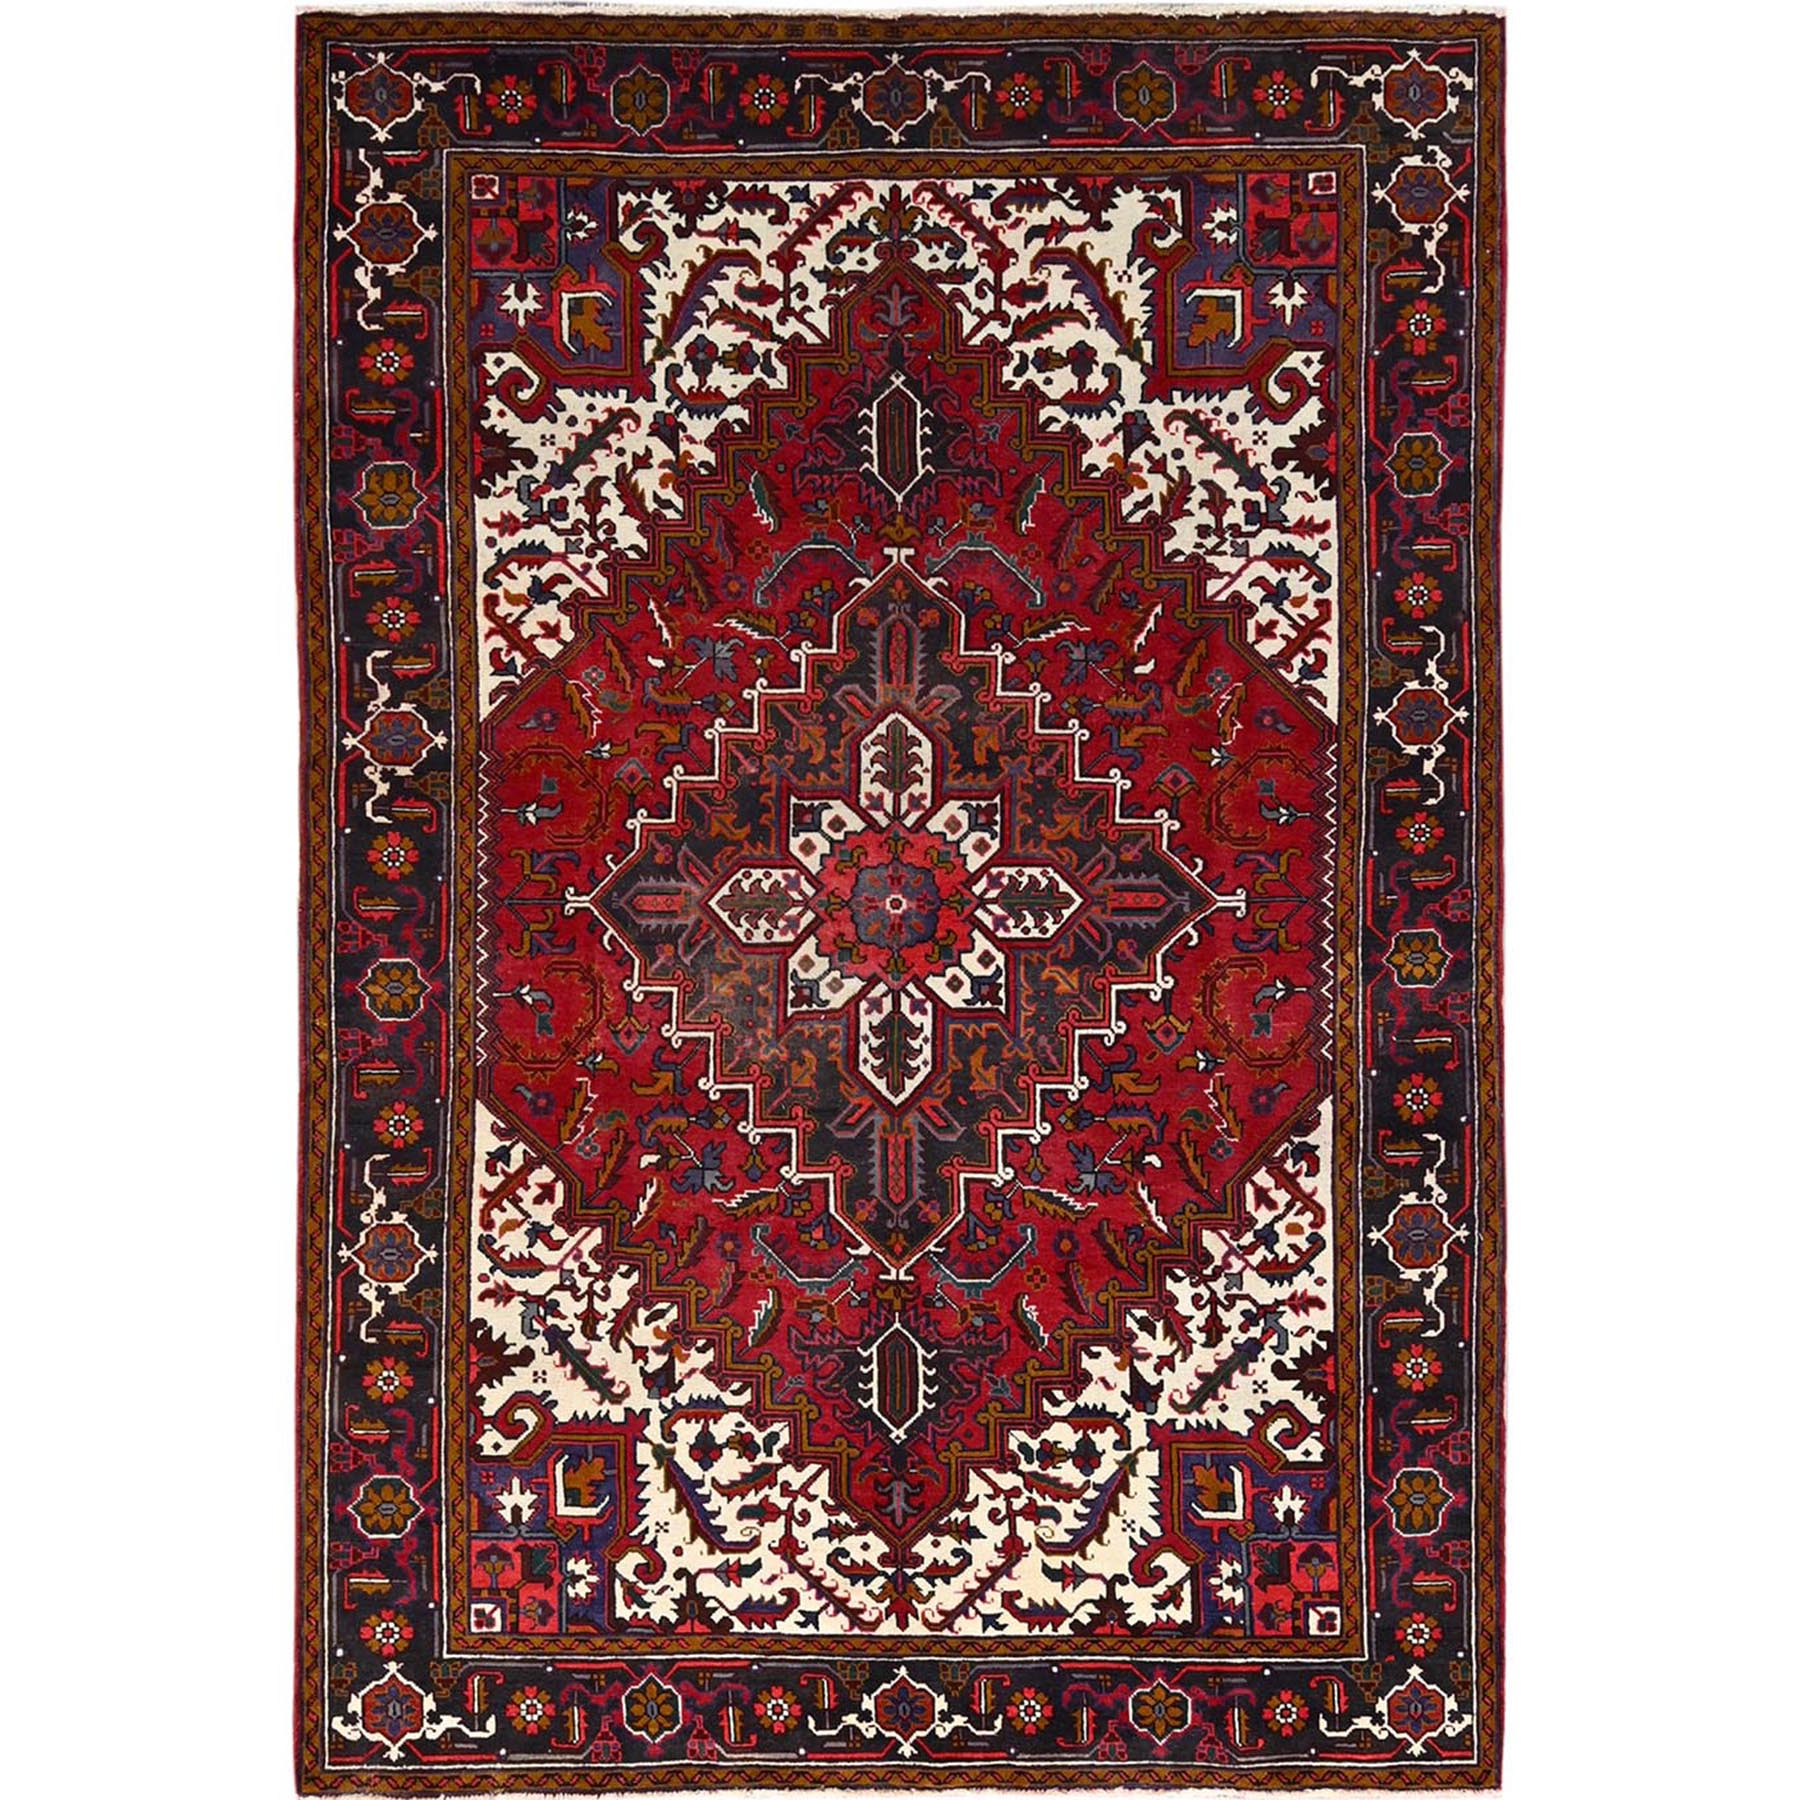  Wool Hand-Knotted Area Rug 6'7